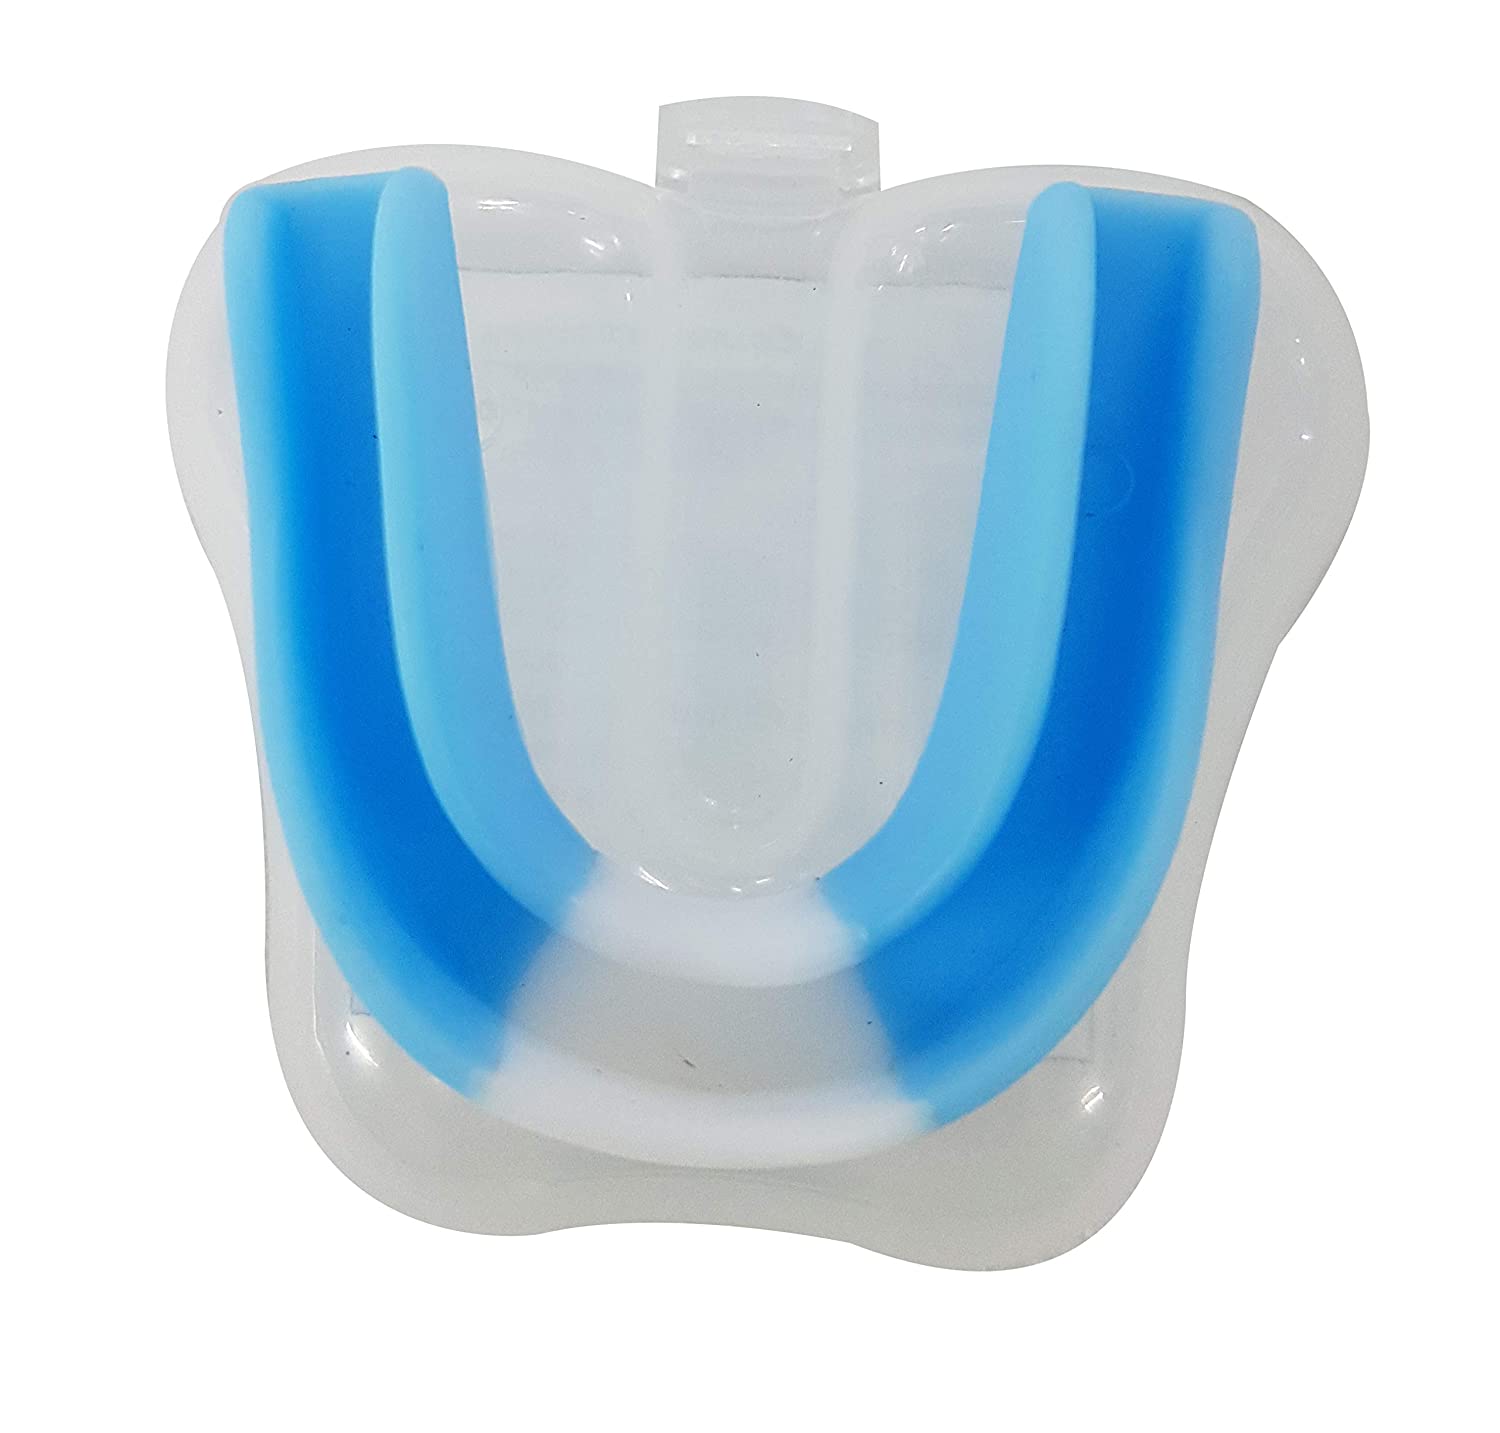 Synco Flavoured Mouth Guard/Gum Shield - for Boxing, MMA, Rugby, Muay Thai, Hockey, <br>Judo, Karate Martial Arts and <br>All Contact Sports| <br>1 Pc (Sky Blue-White) - 1